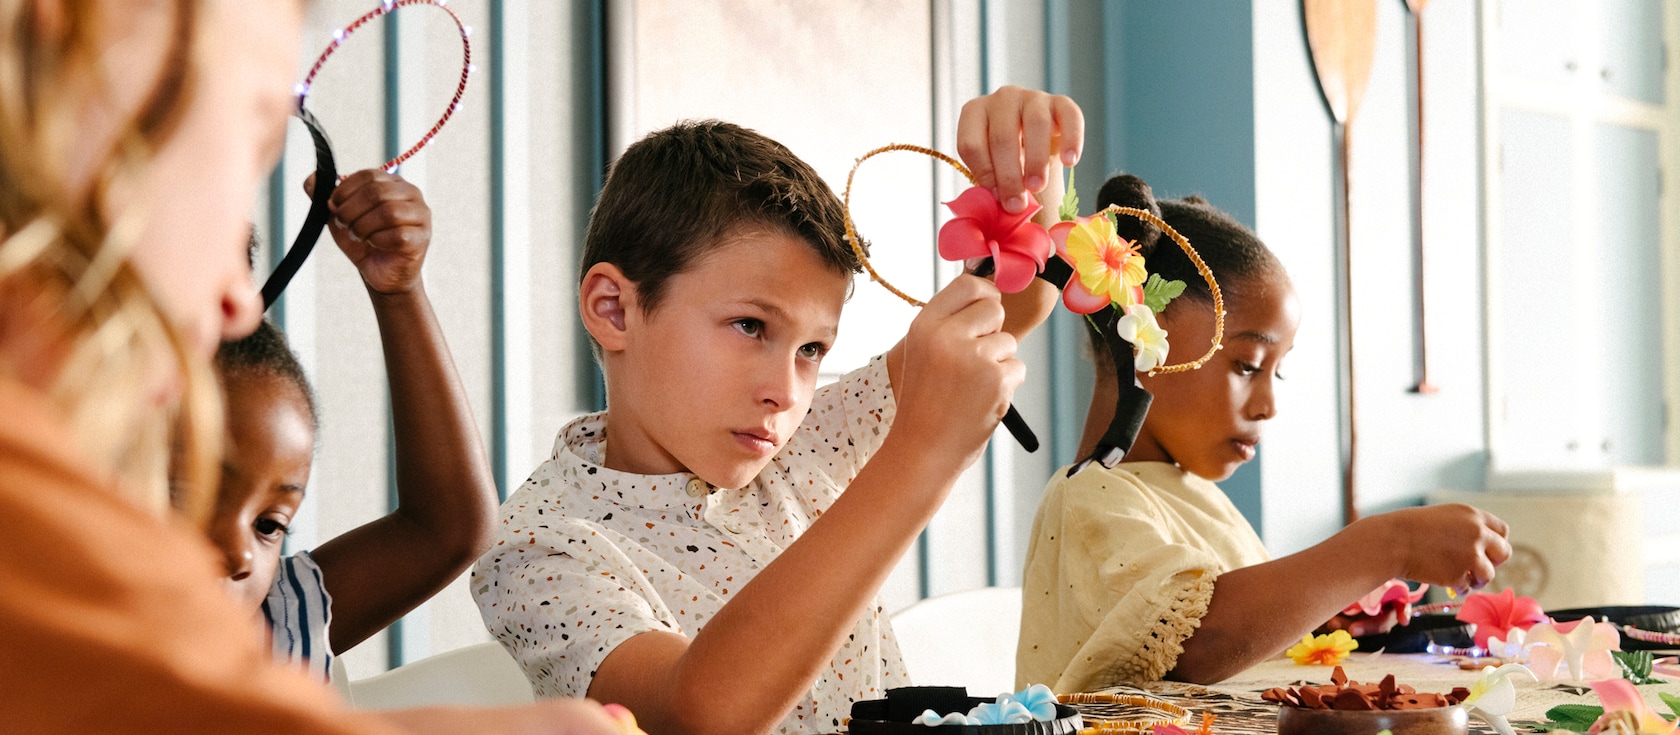 Children sit at a table making Mickey Ears from art supplies and flowers